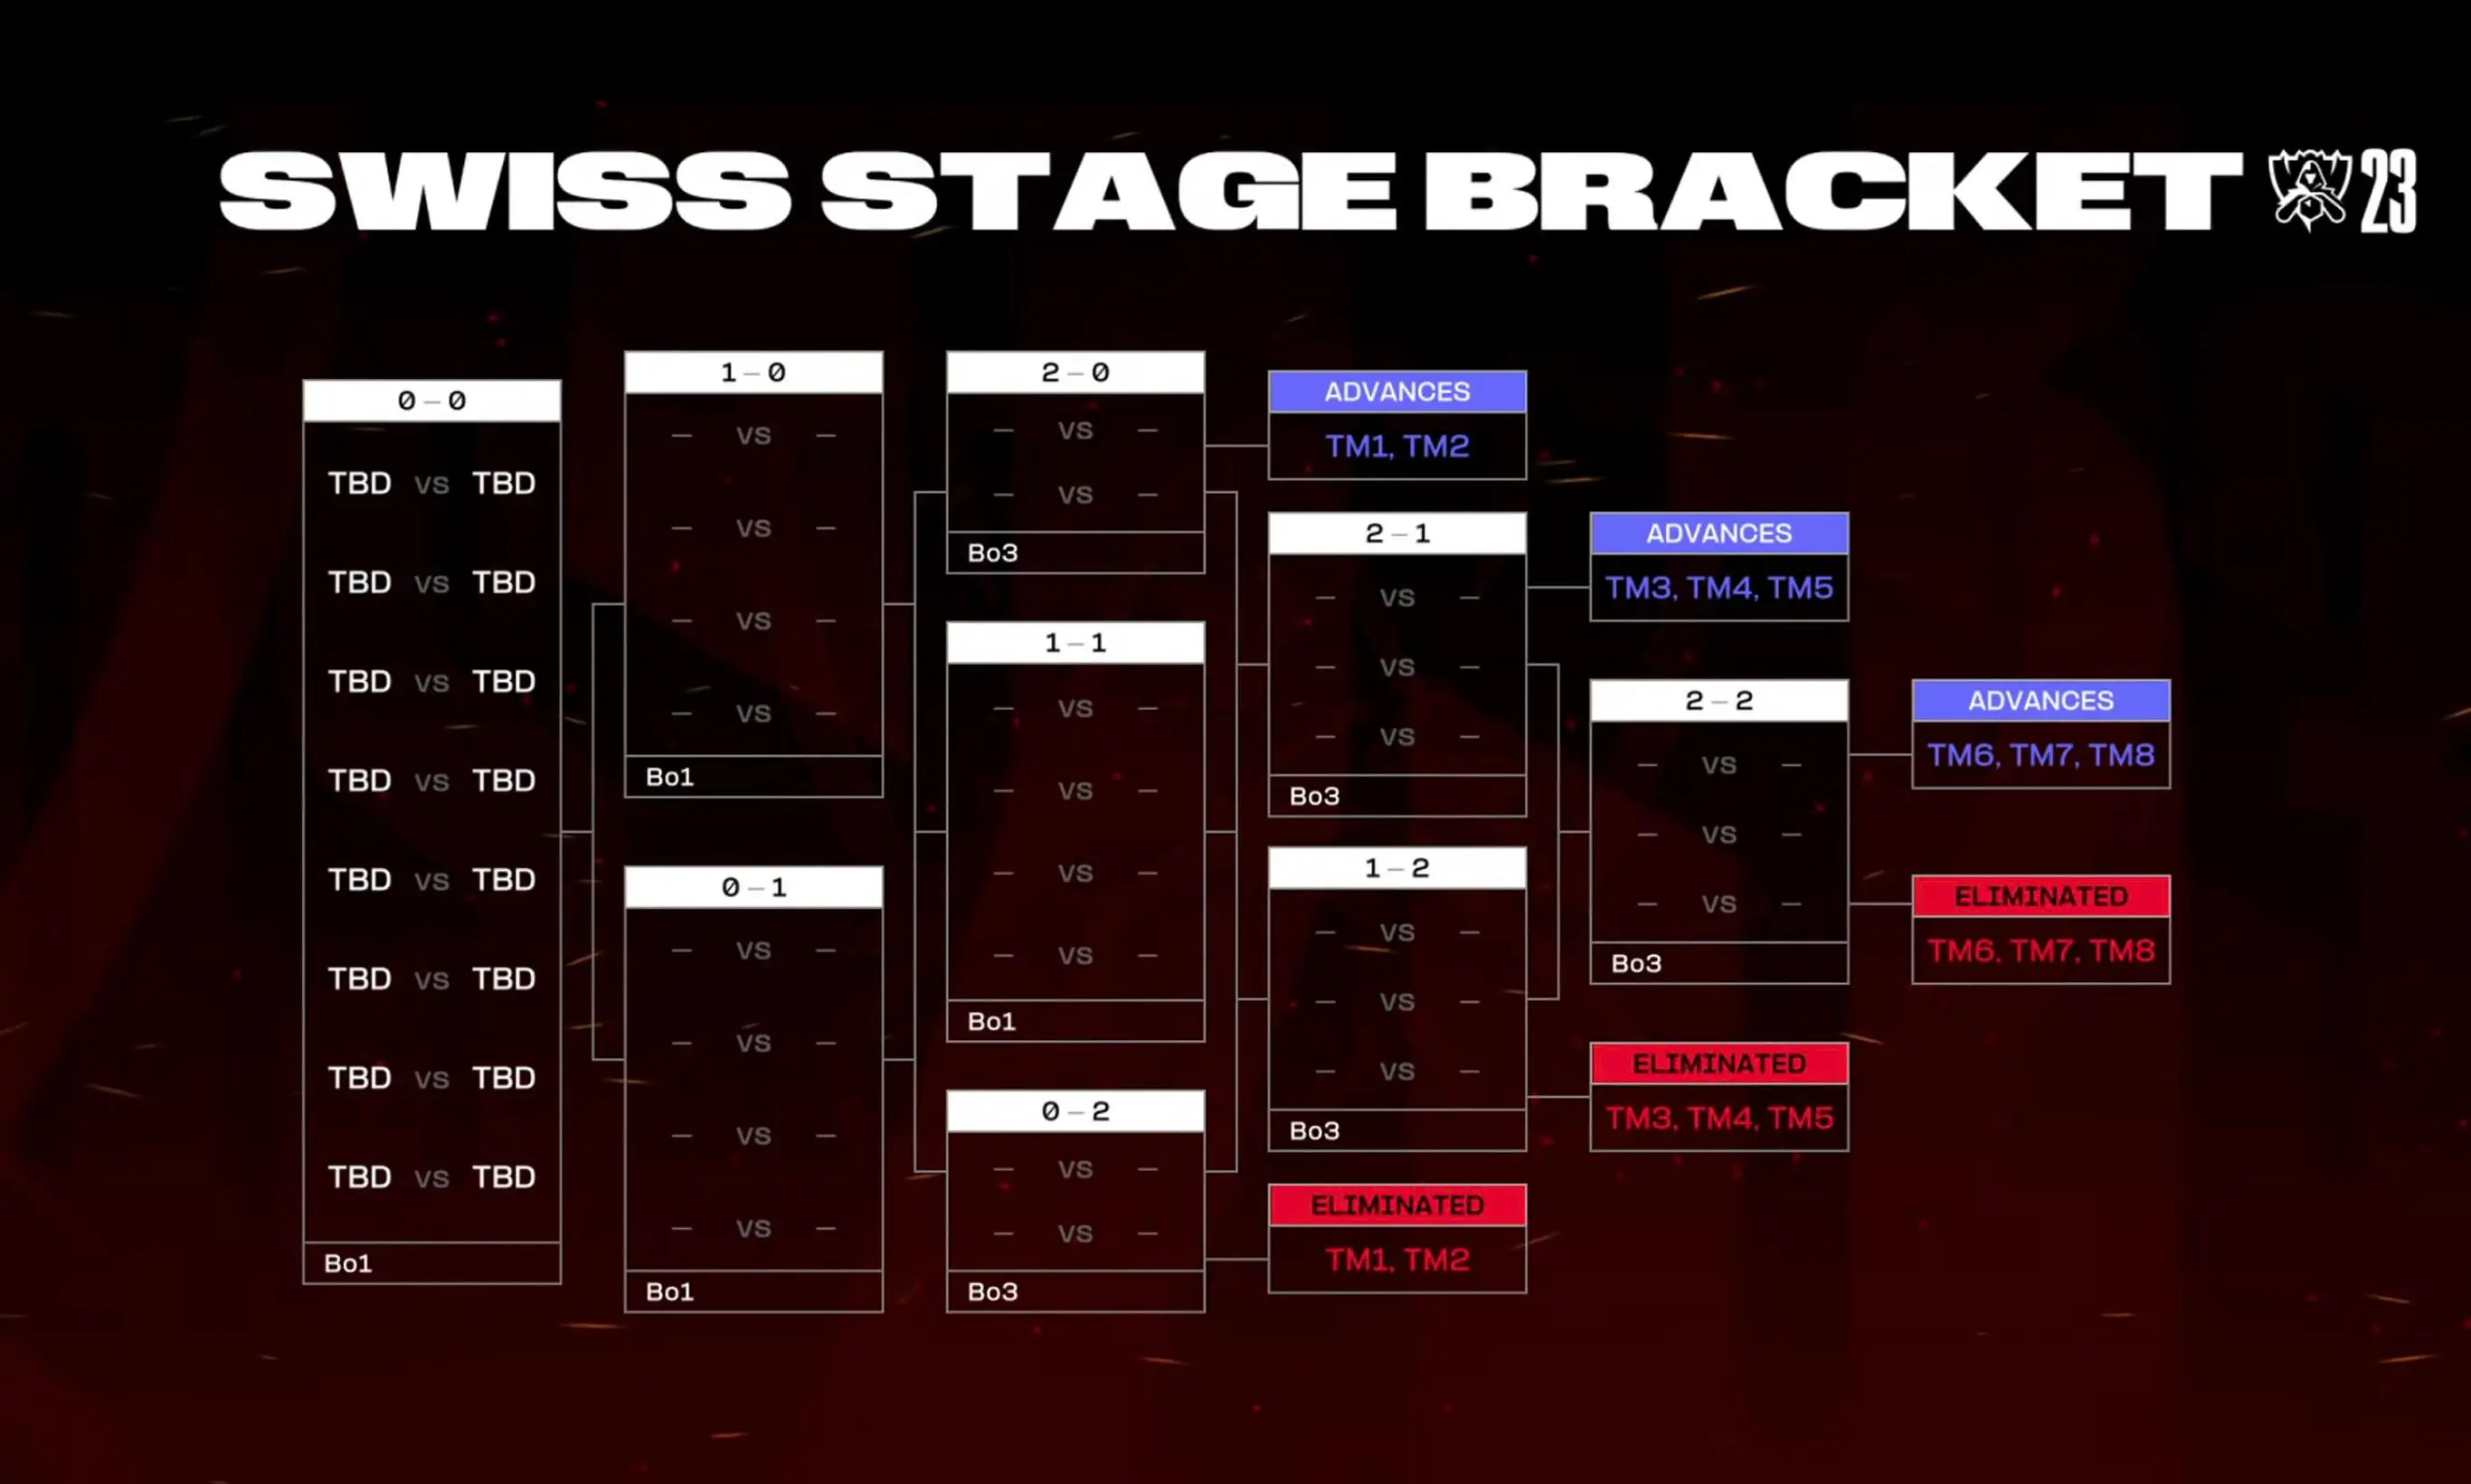 LoL Worlds 2023 main event Swiss stage schedule, scores, and standings